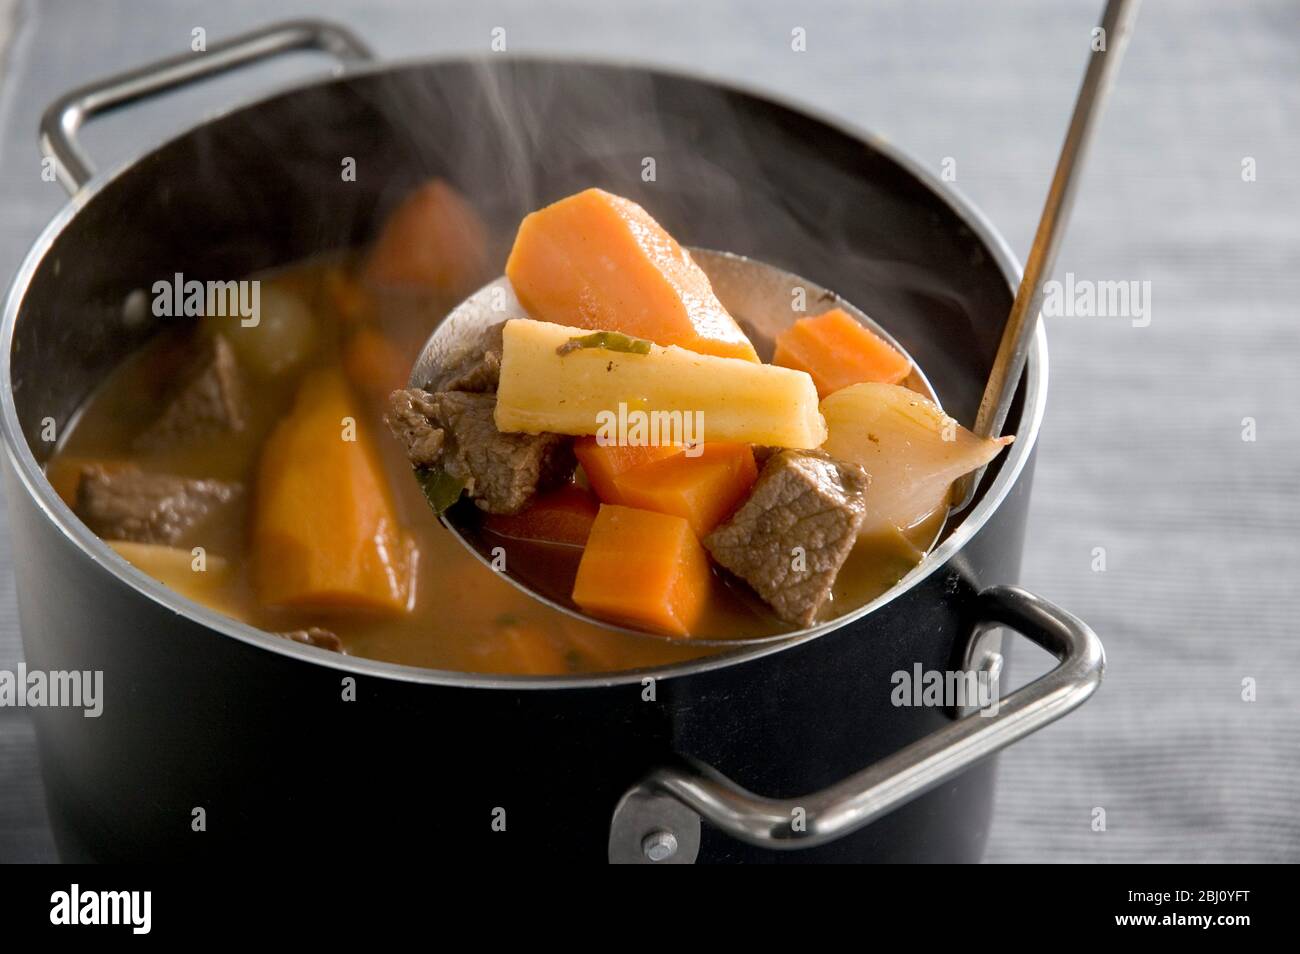 Beef stew with root vegetables with a ladle being used to serve a portion - Stock Photo